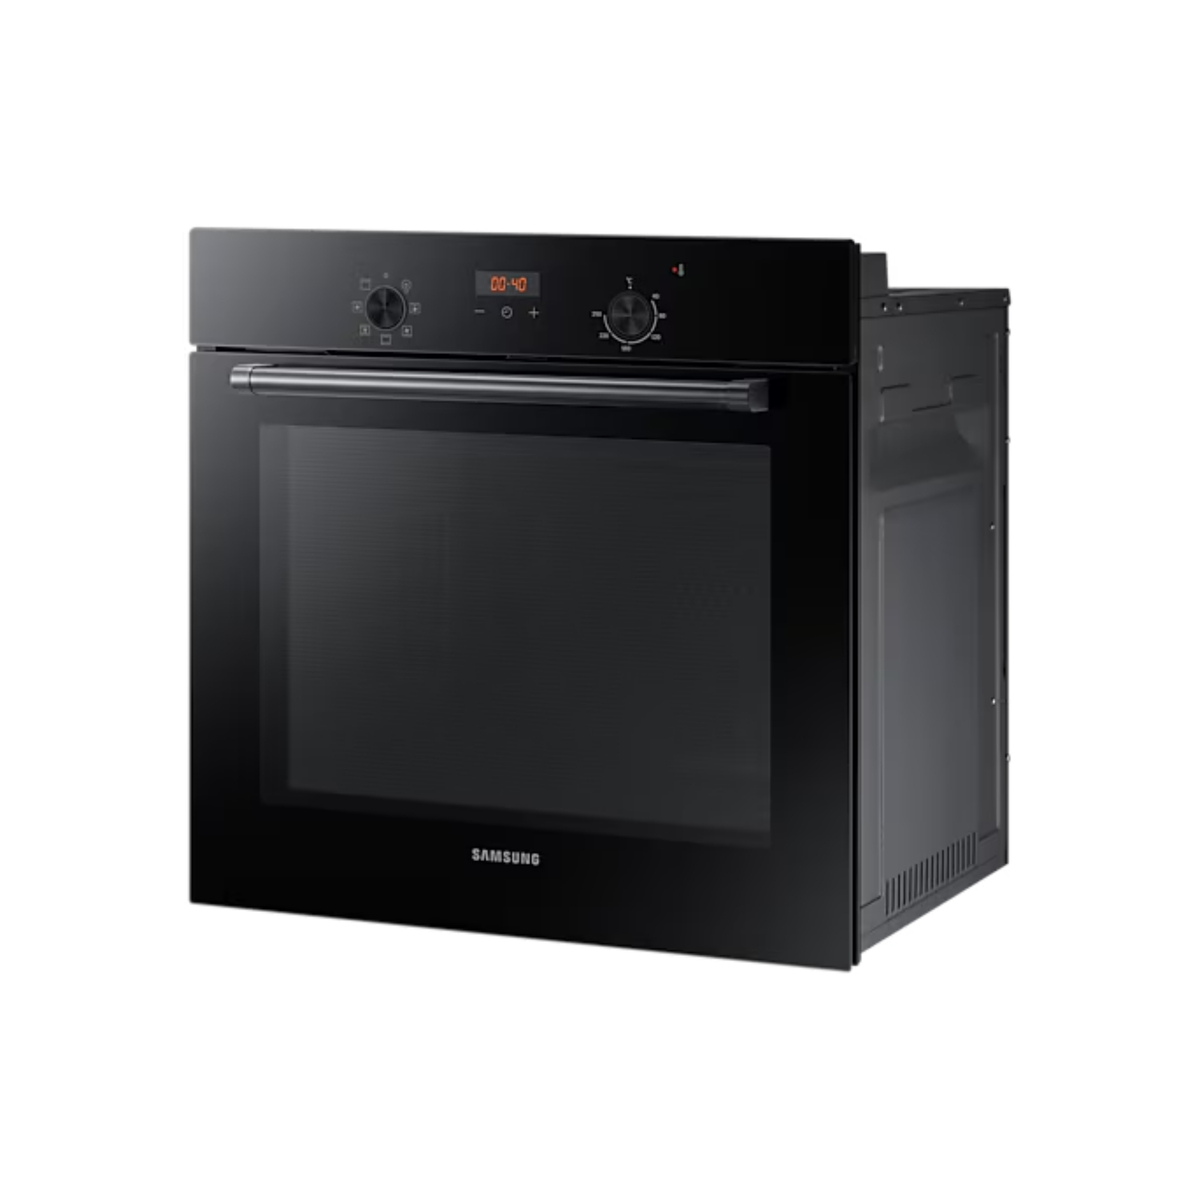 Samsung Fan Assisted Electric Oven with Convection, 60L, 1800W, Black, NV60K5140BB/SG